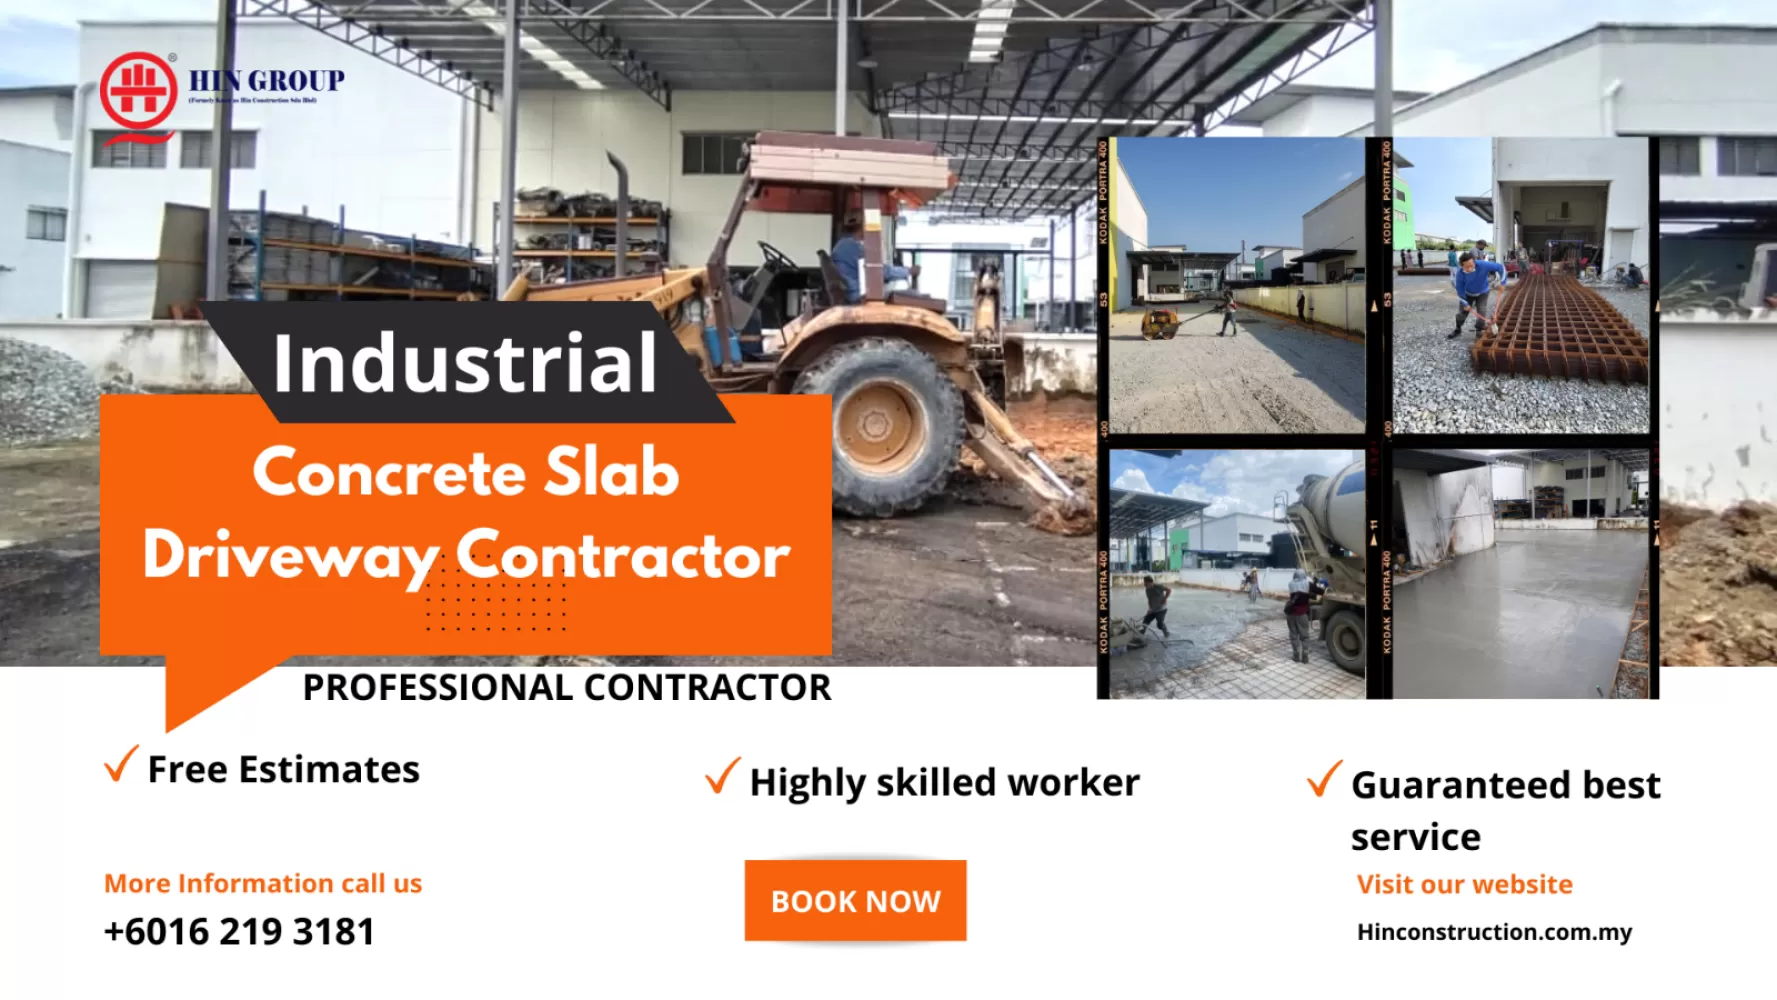 Hire a Concrete Slab Contractor In Gelang Patah, Johor Now